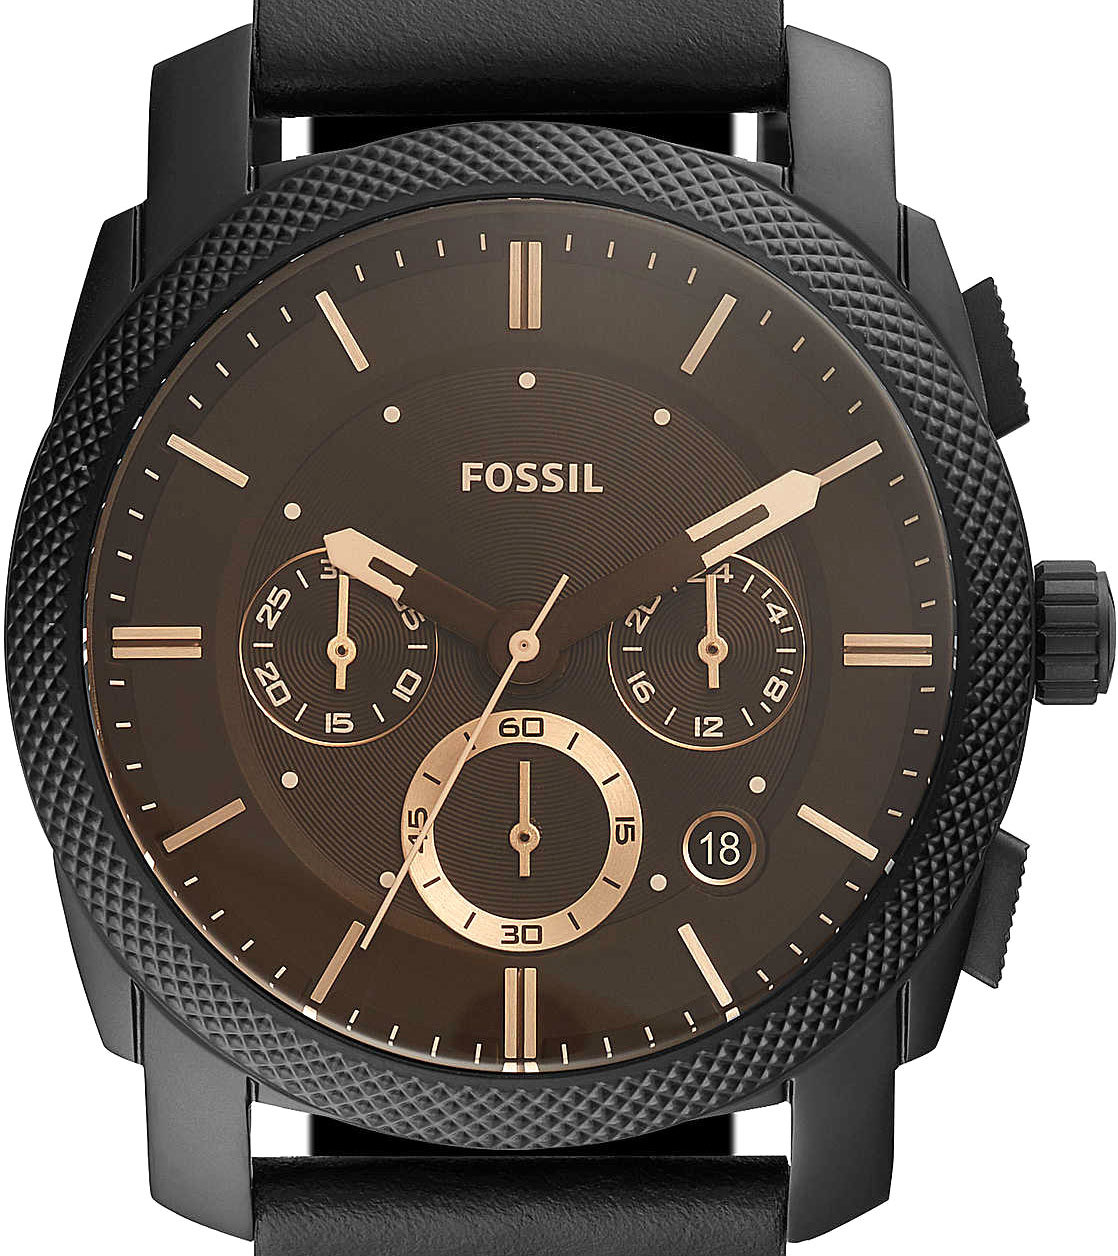 Amazing Are Fossil Watches Good of the decade Learn more here!